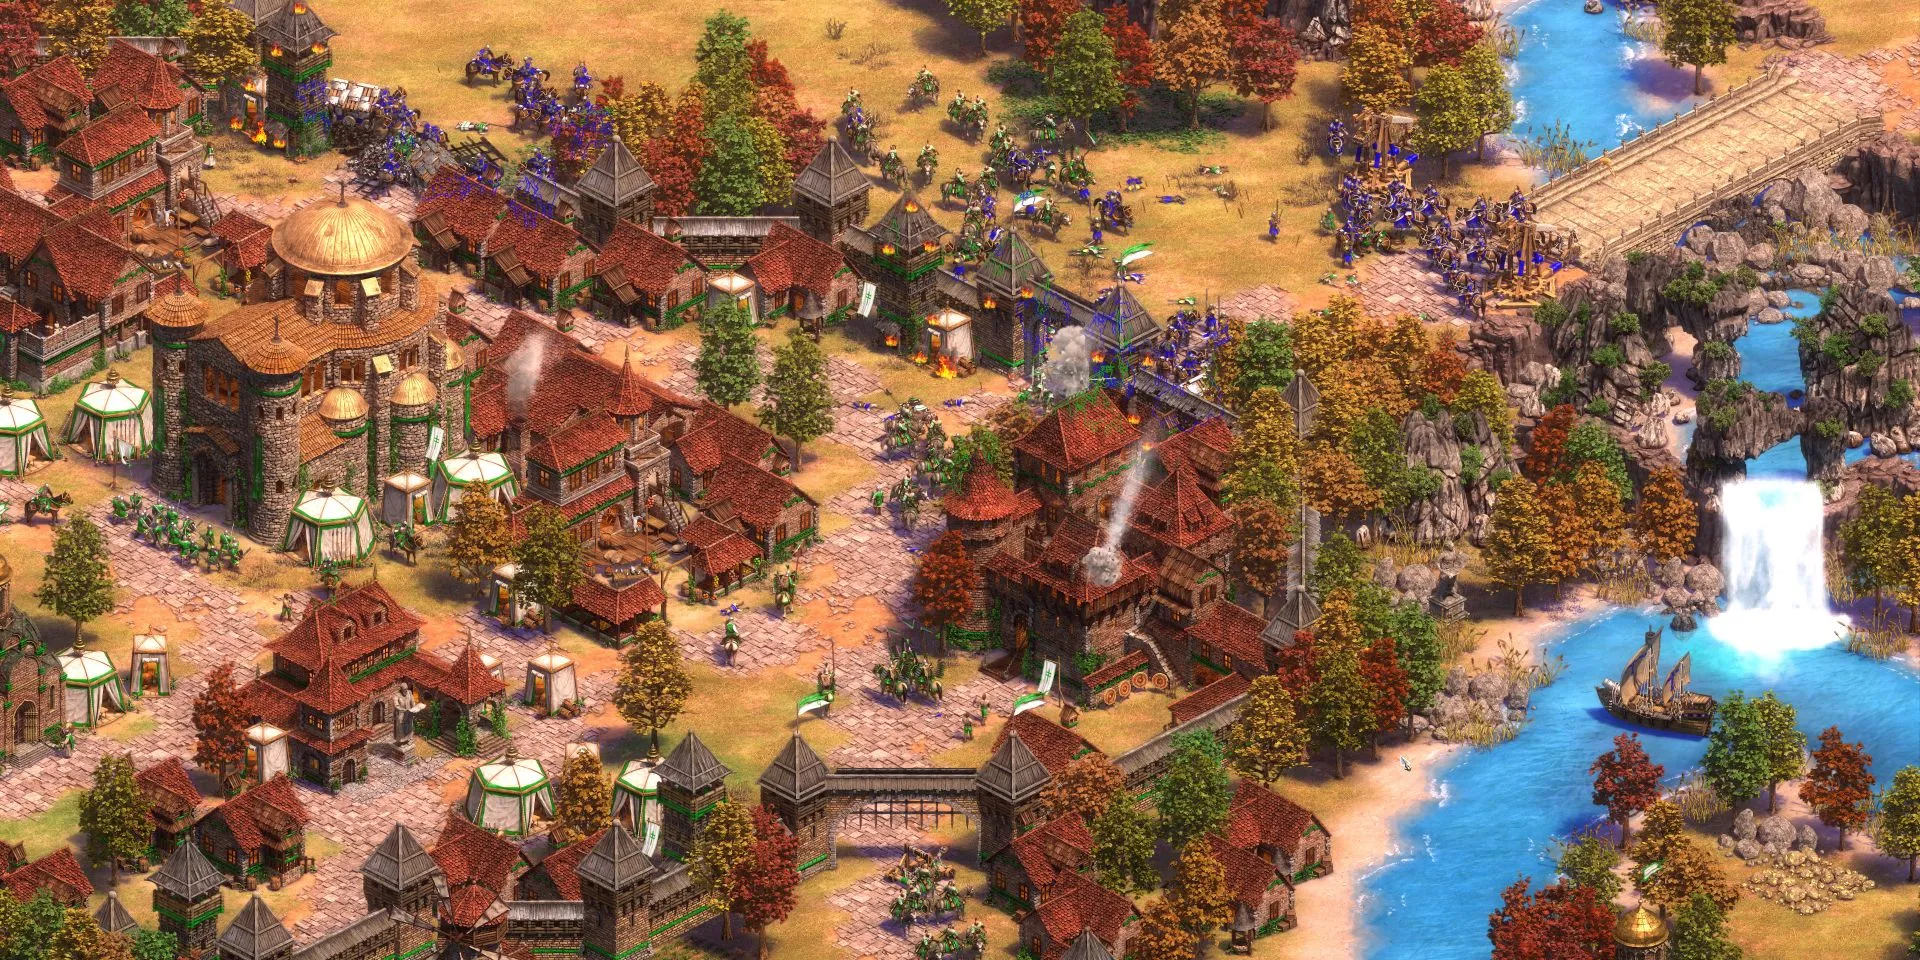 The purple player attacks the green player’s village in Age of Empires 2 Definitive Edition